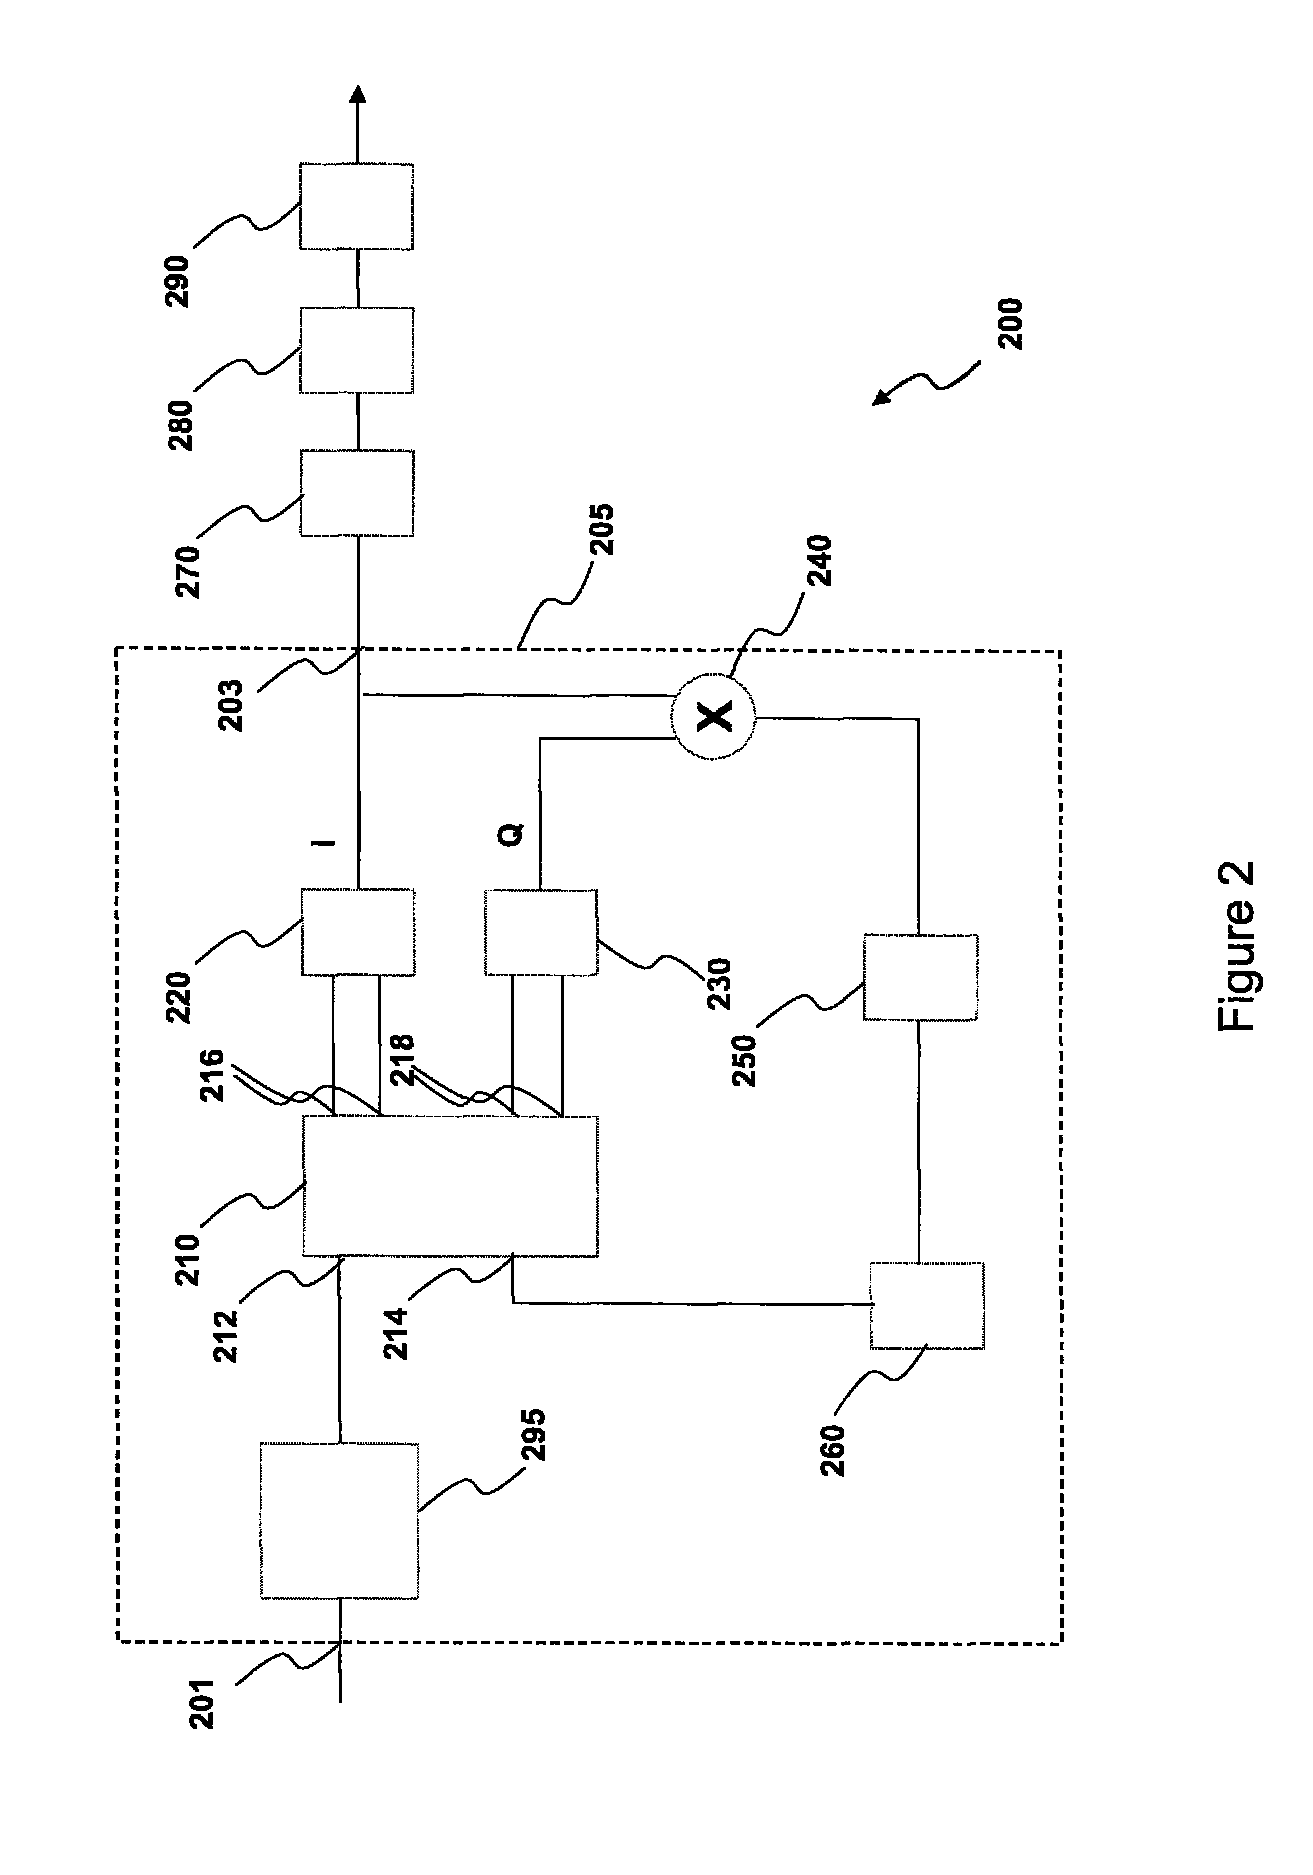 System and method for coherent detection of optical signals